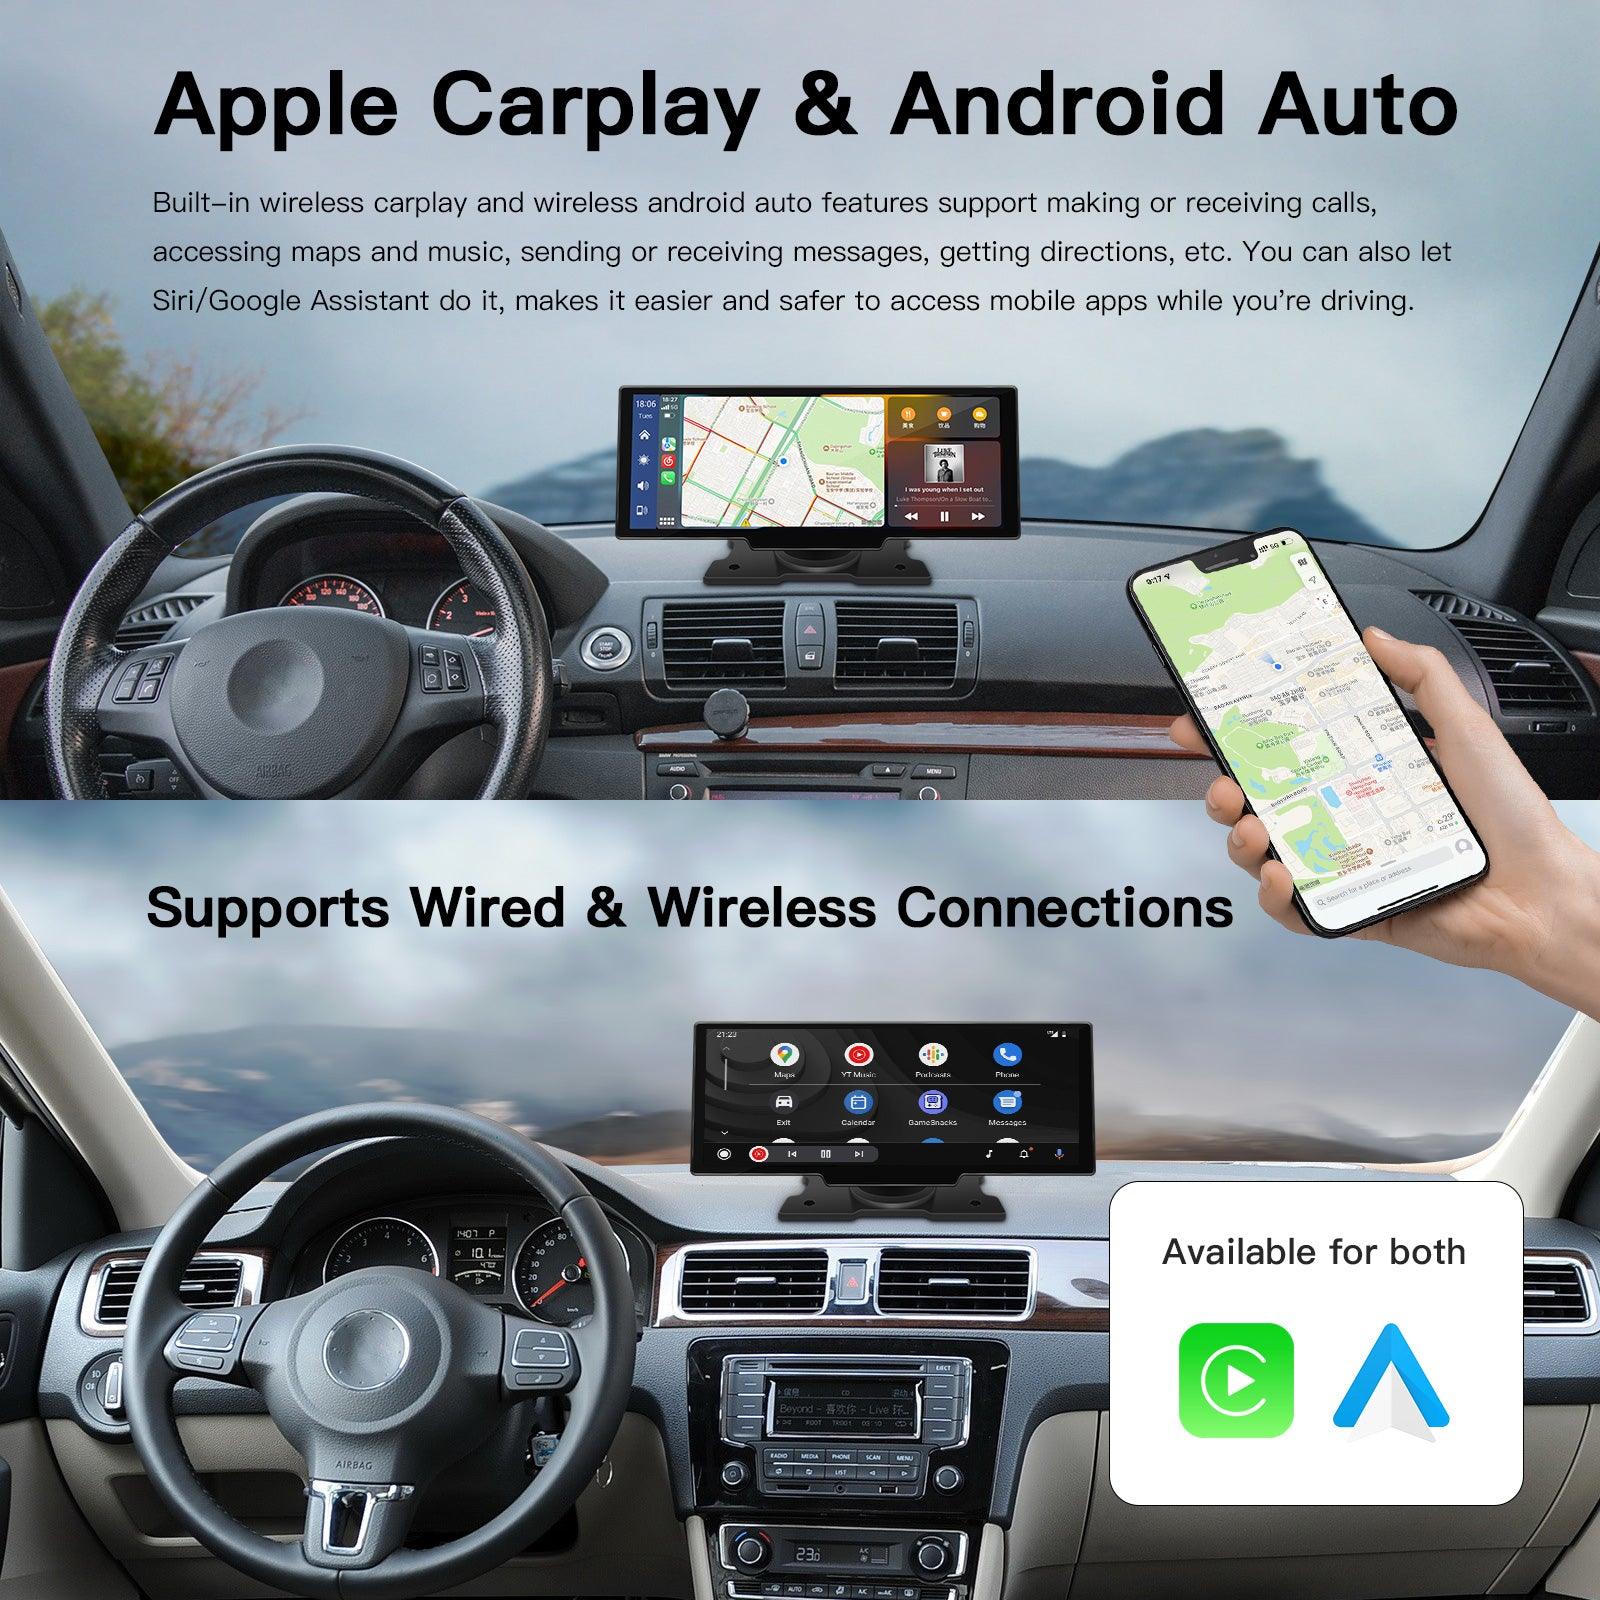 Every Car With Apple CarPlay, Android Auto, Or Both